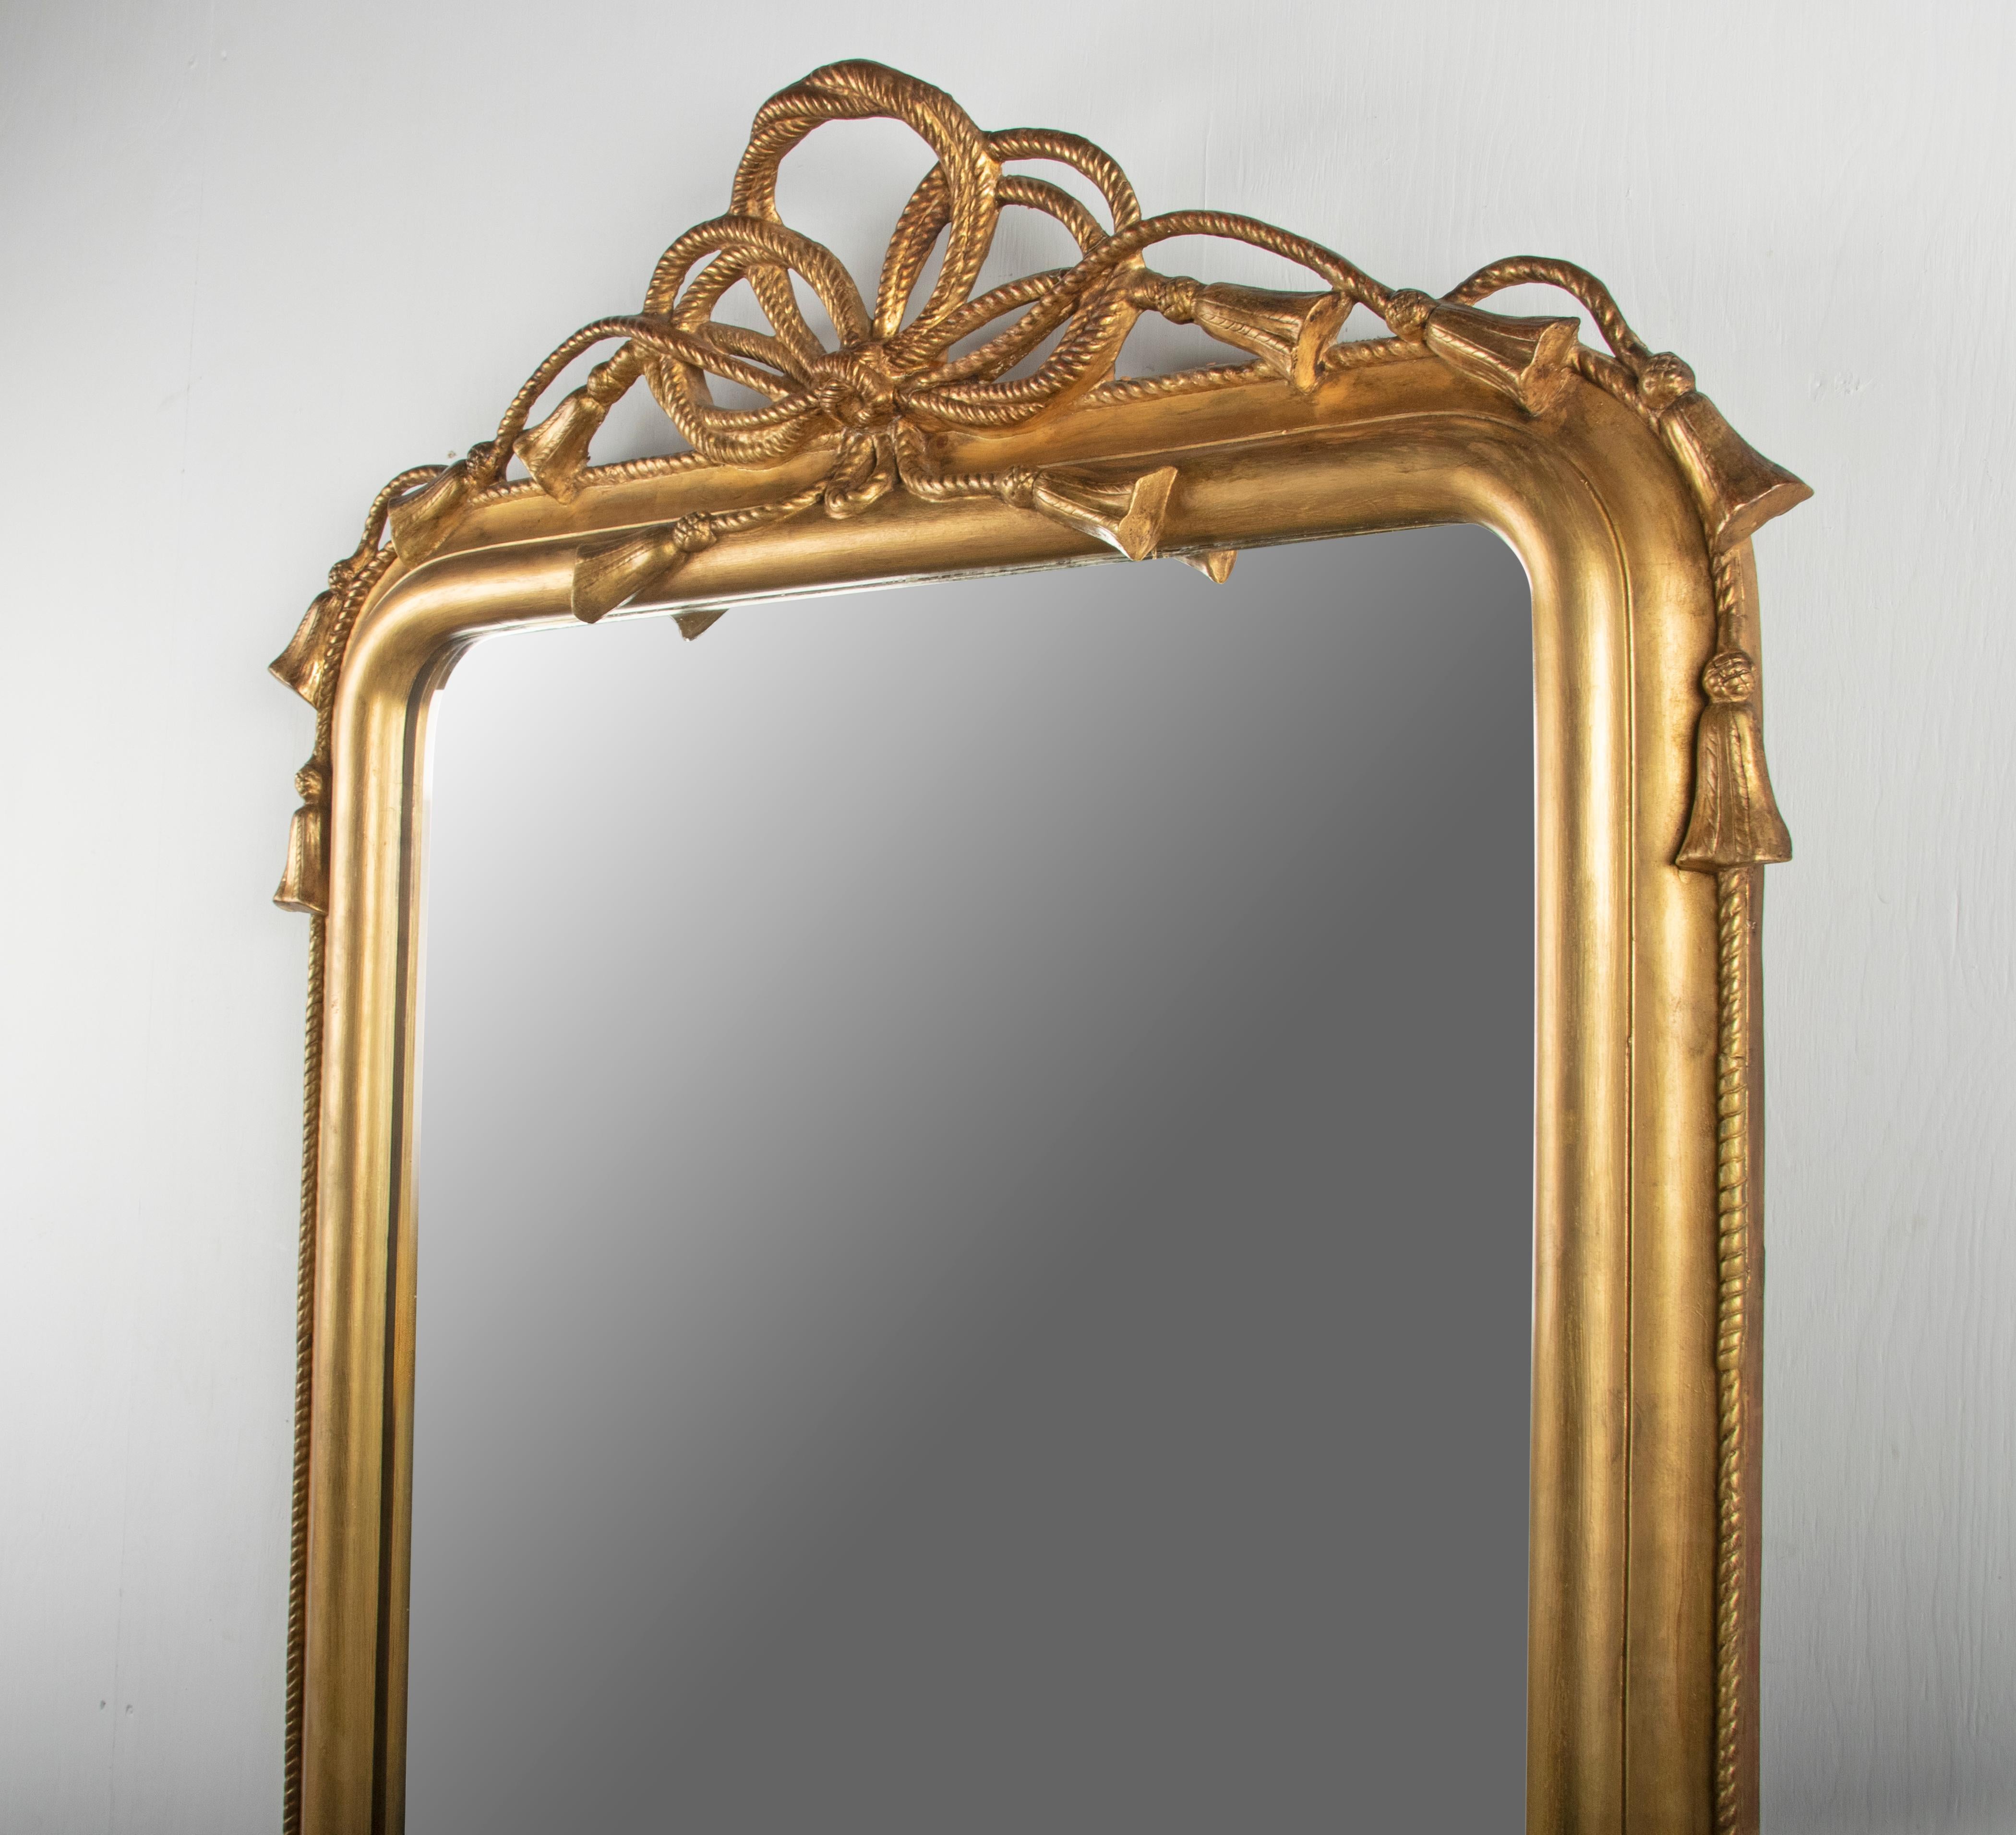 19th Century Napoleon III Gilded Wall Mirror with Rope and Tassels For Sale 3